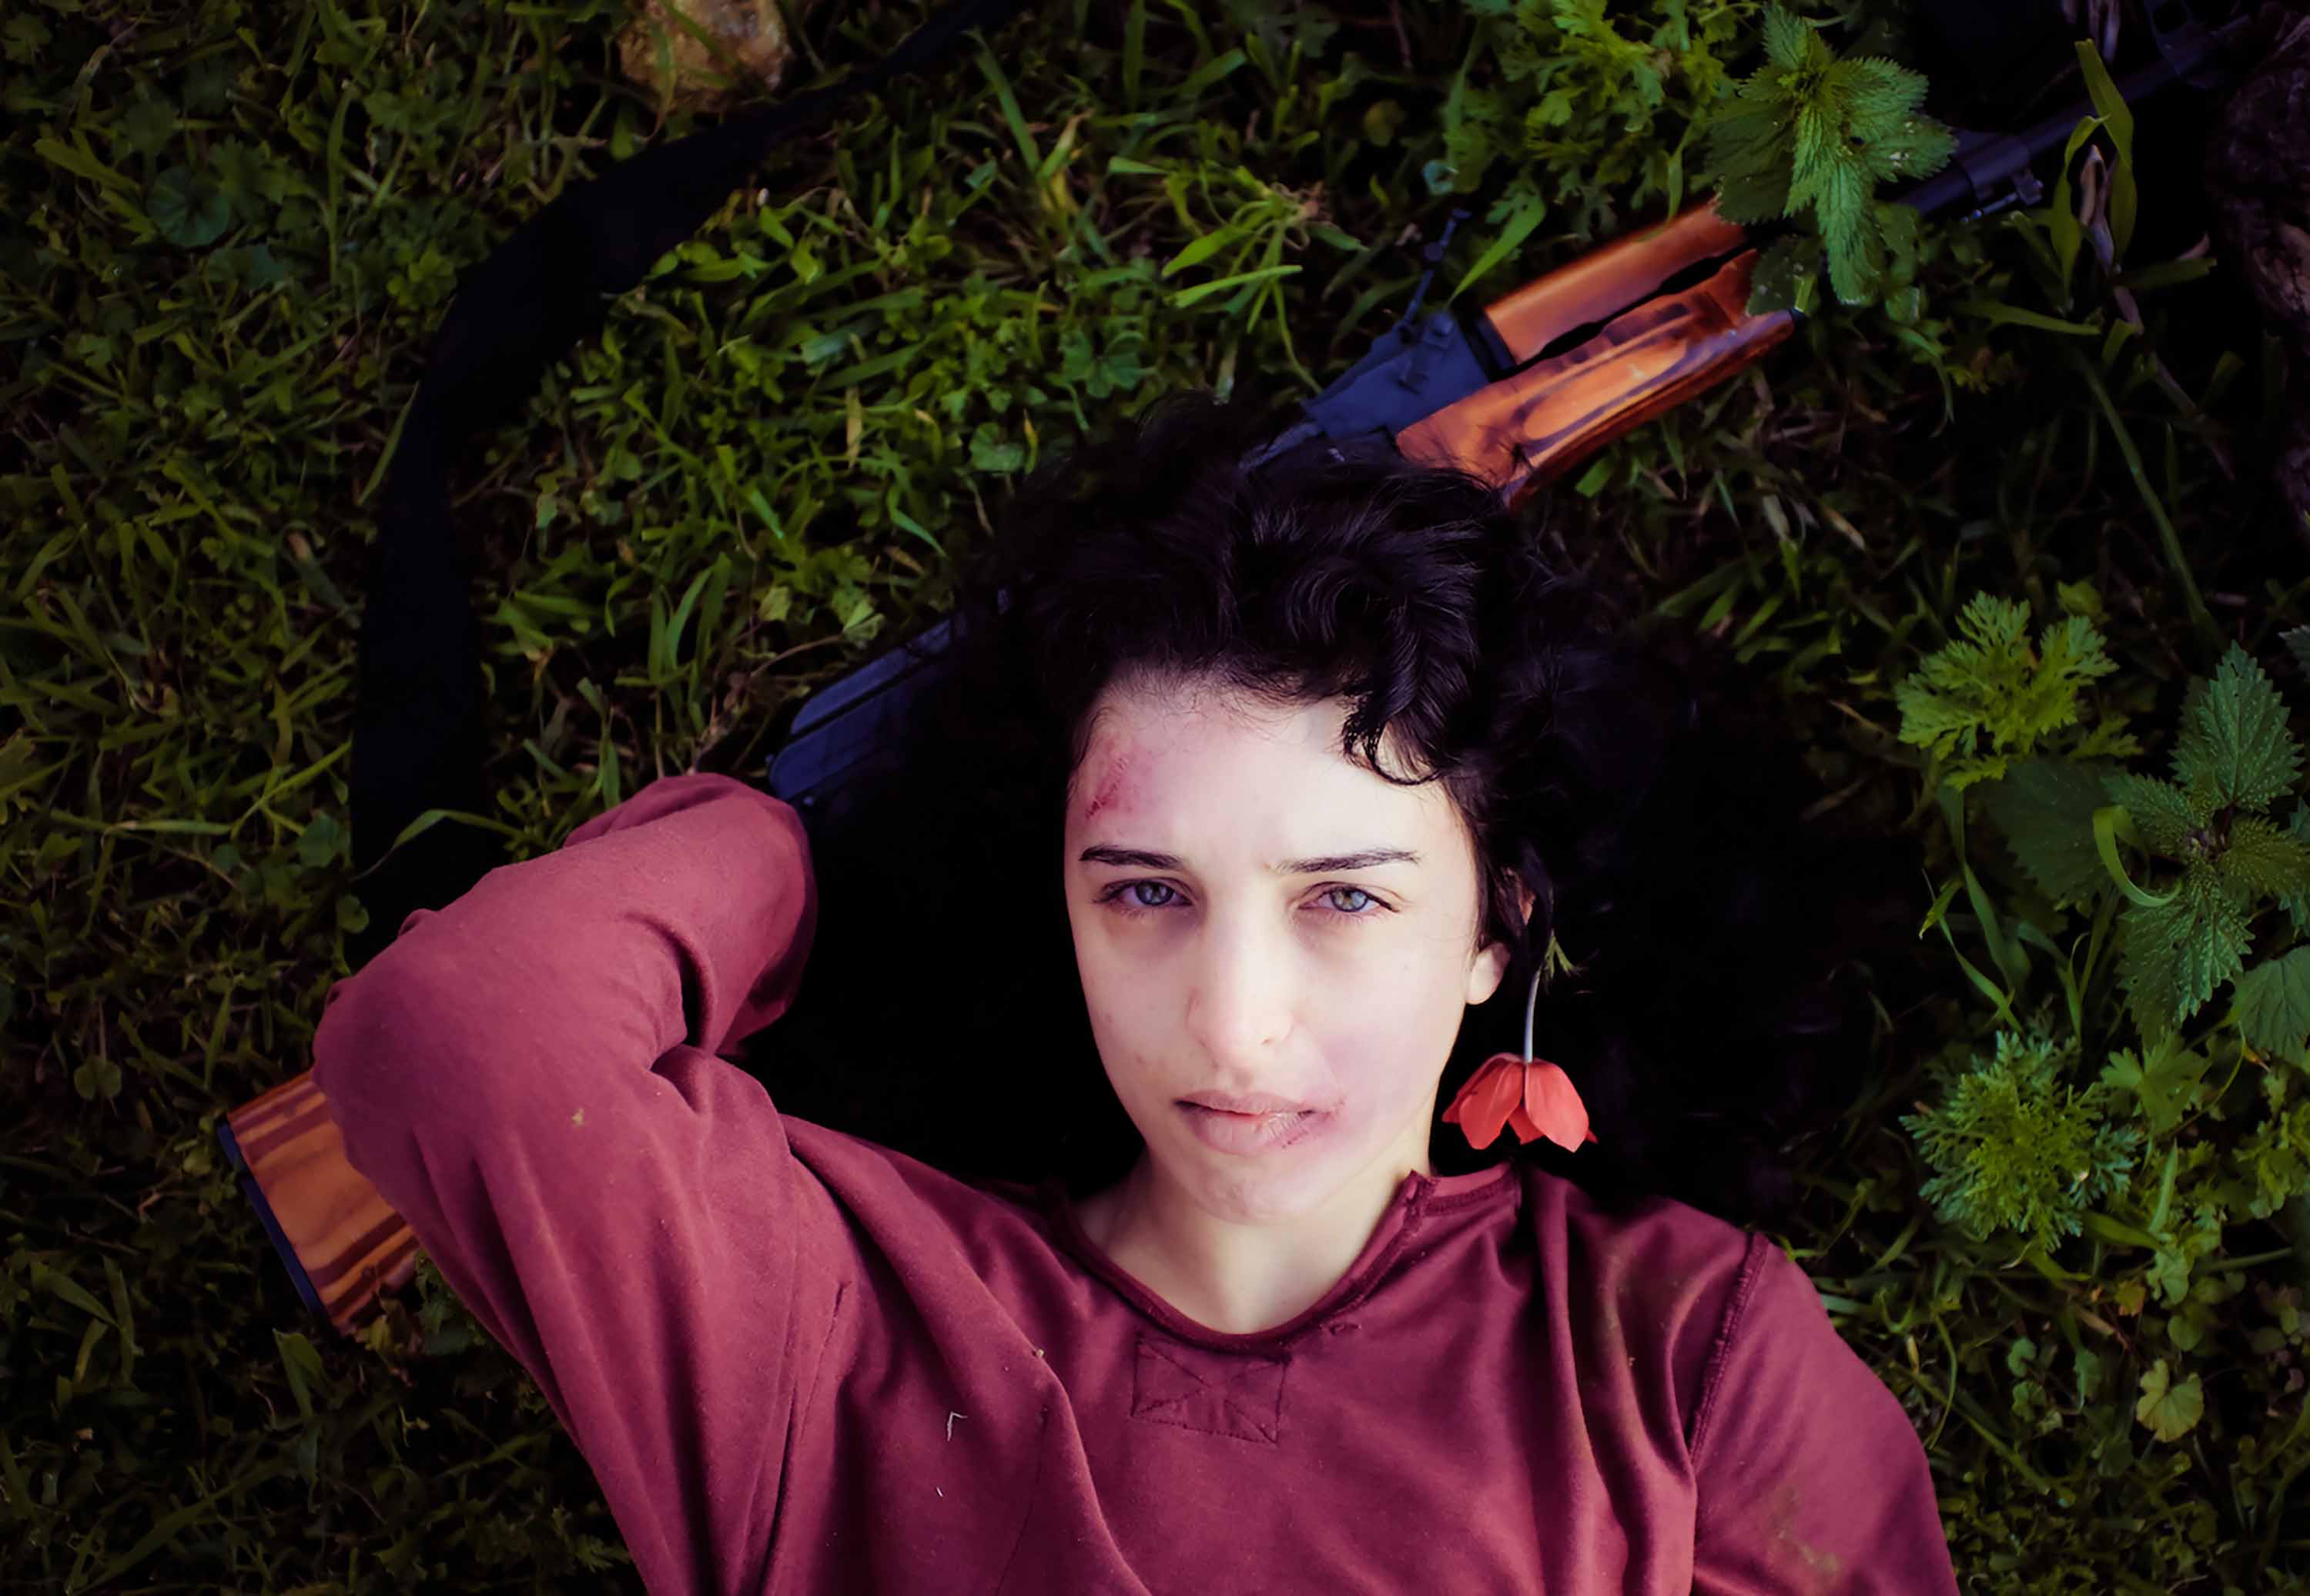  Khawla Ibraheem wears a burgundy long sleeve top while lying on grass. Her head rests on a rifle, and a red flower is tucked behind her ear. She has a bruise on her lip and her forehead.